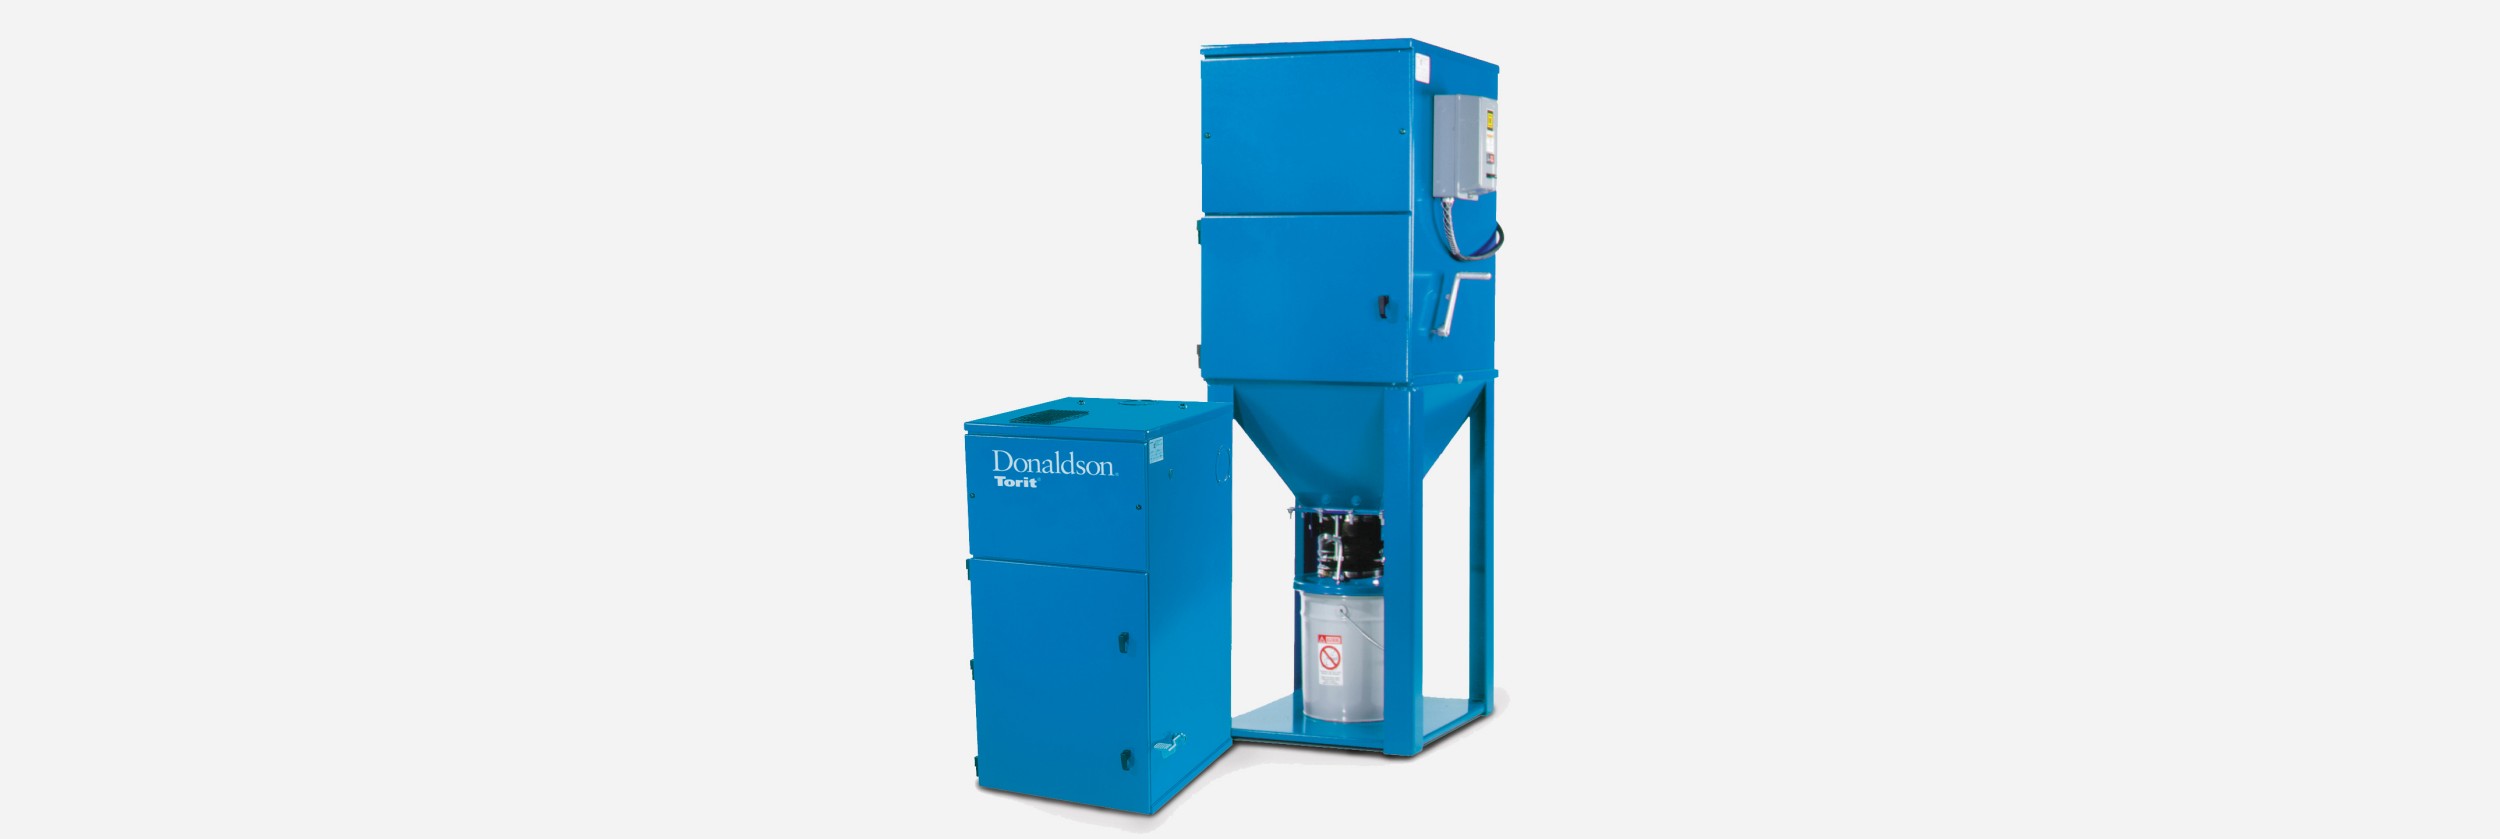 Donaldson Cabinet Series dust collector hero image | AIRPLUS Industrial